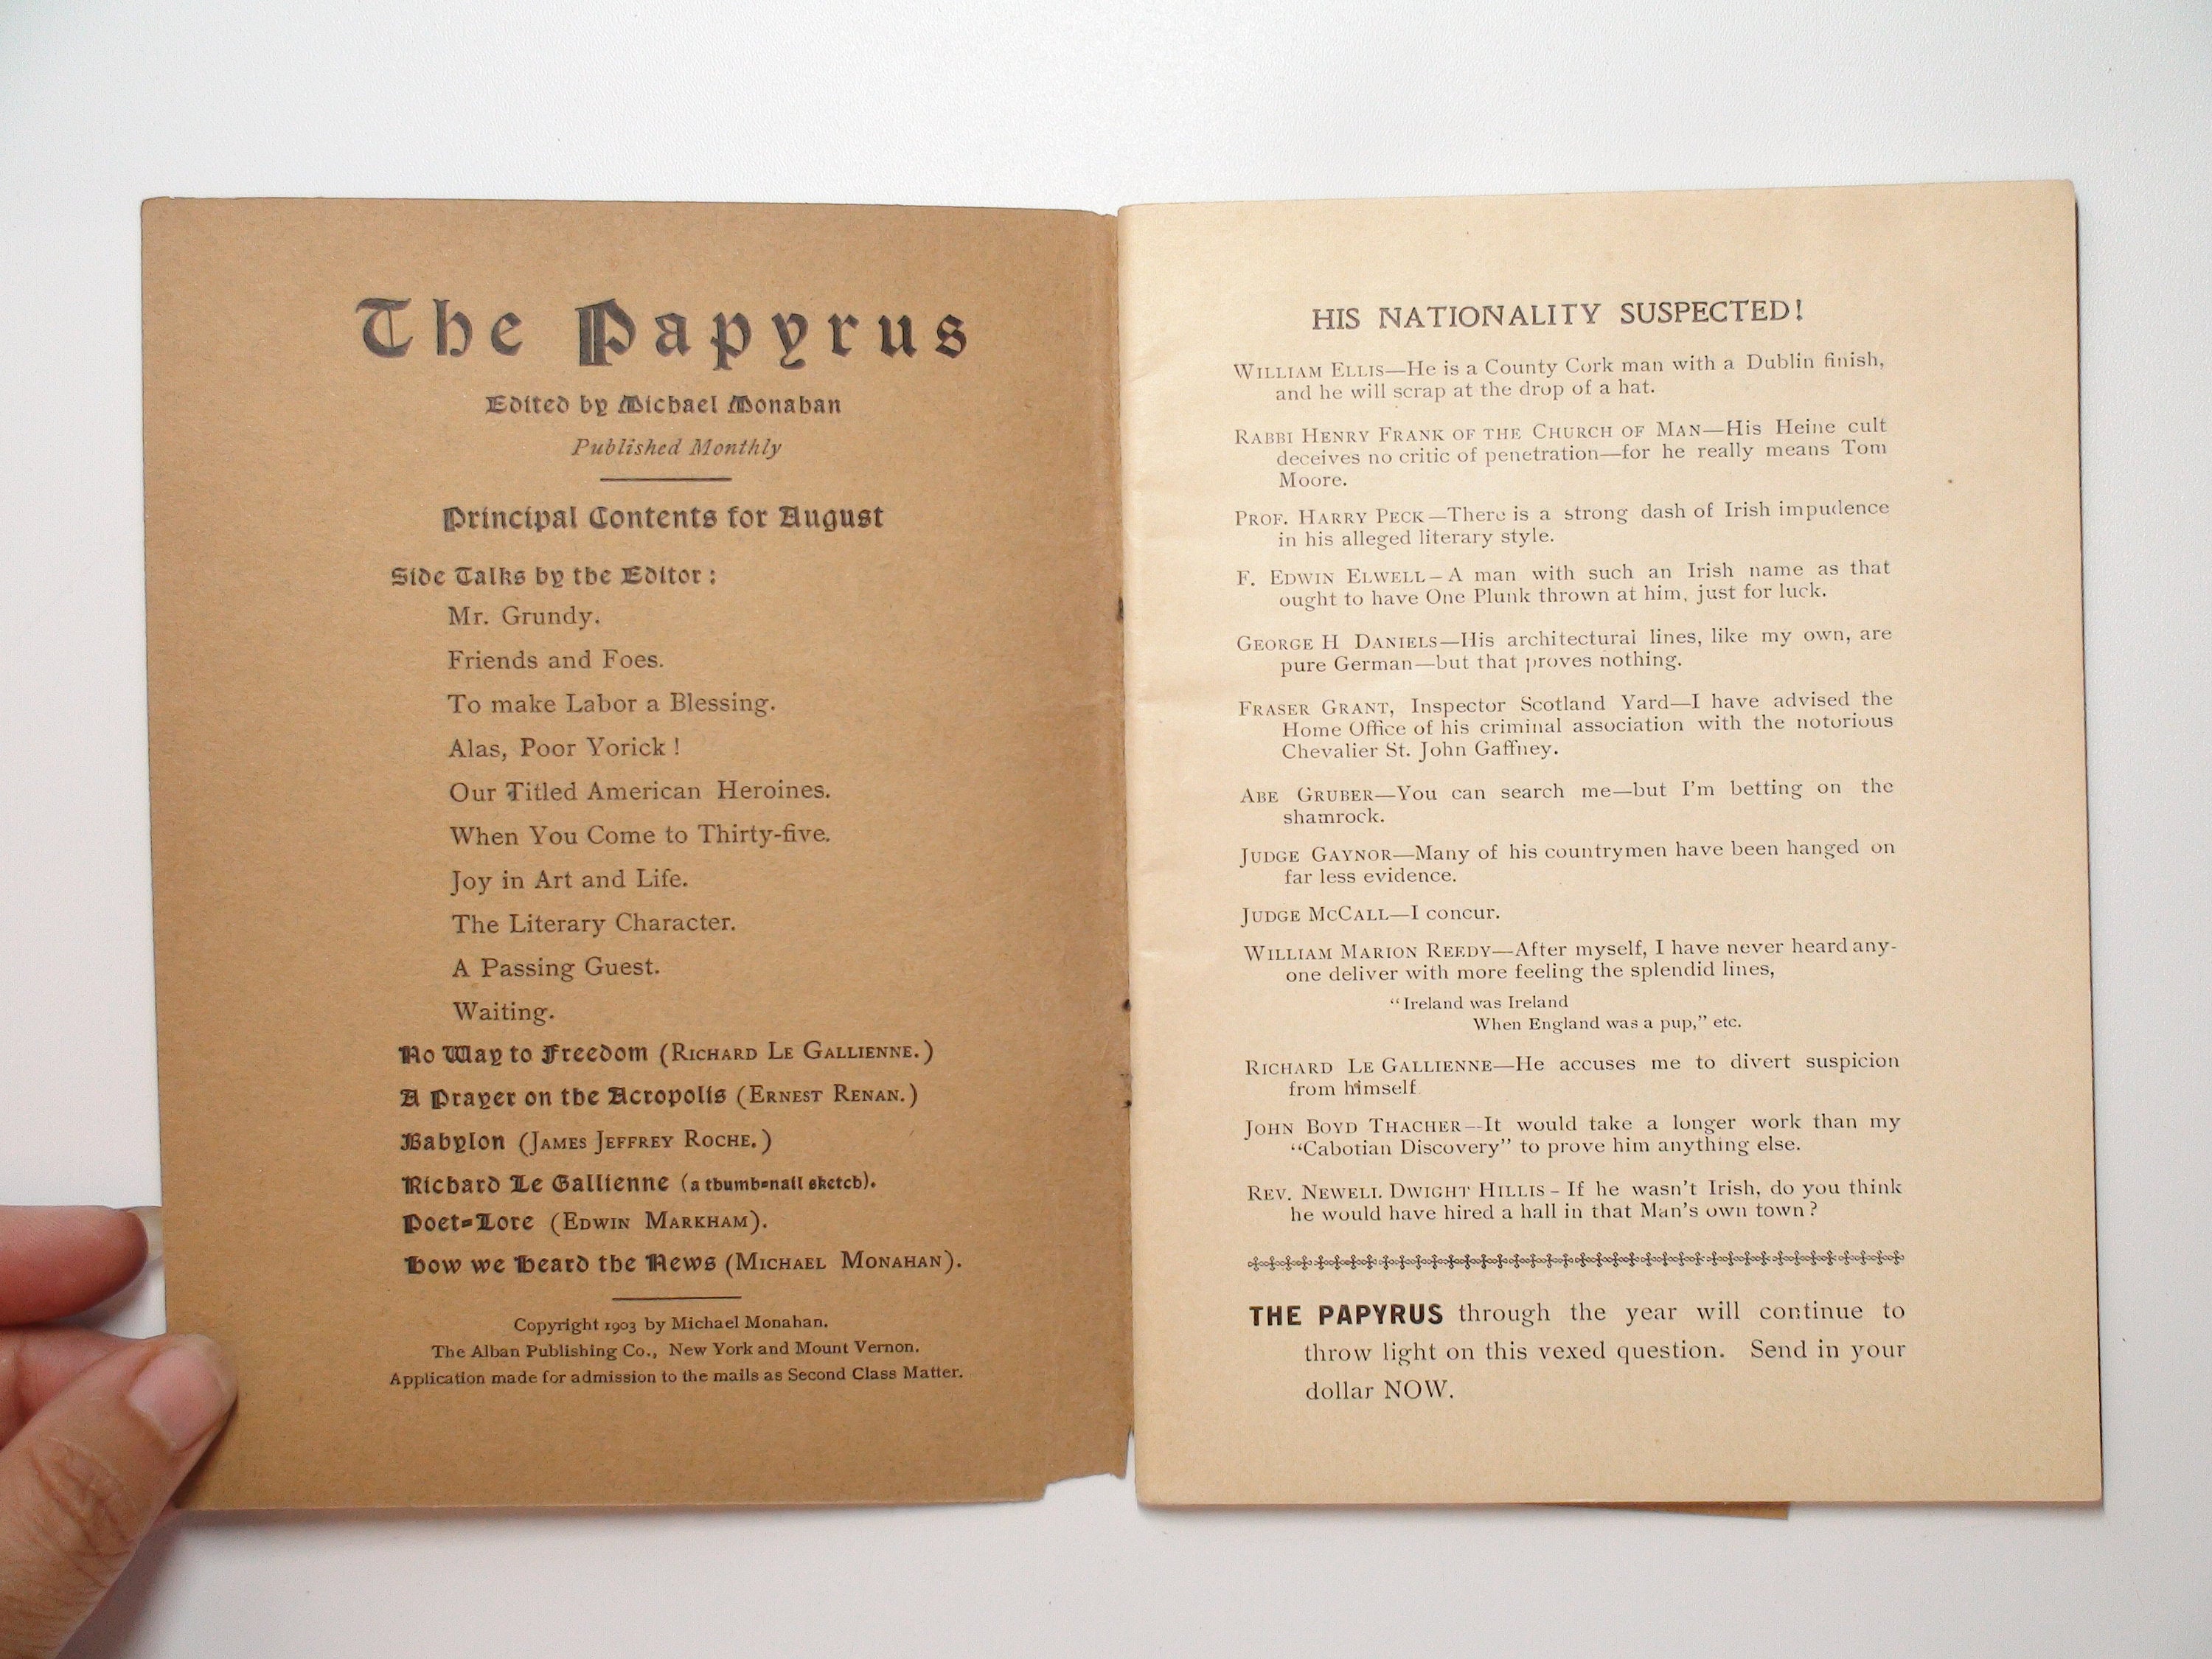 The Papyrus Magazine, Ed. by Michael Monahan, RARE, 1st Ed, August 1903